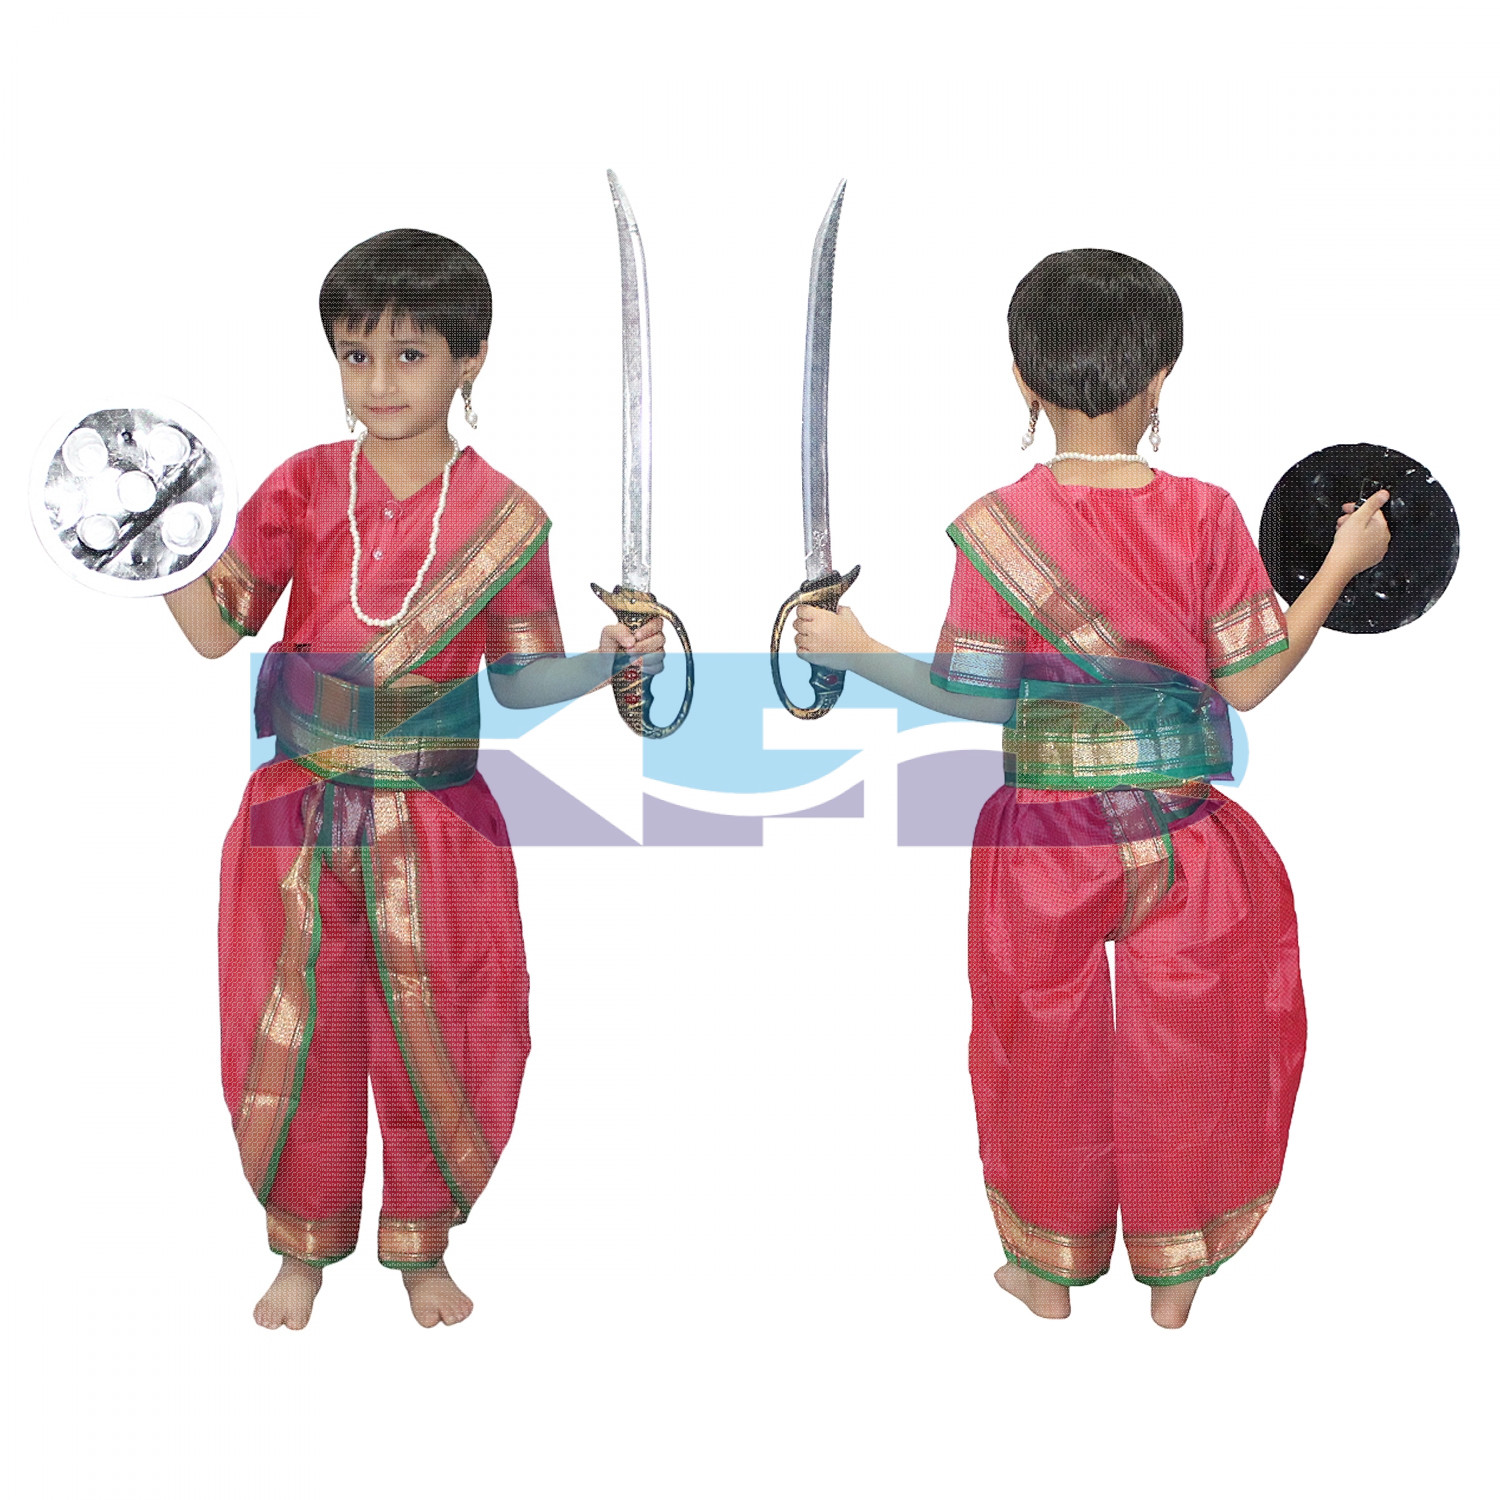 Rani Laxmi Bai fancy dress for kids,National Hero/freedom figter Costume for Independence Day/Republic Day/Annual function/theme party/Competition/Stage Shows Dress